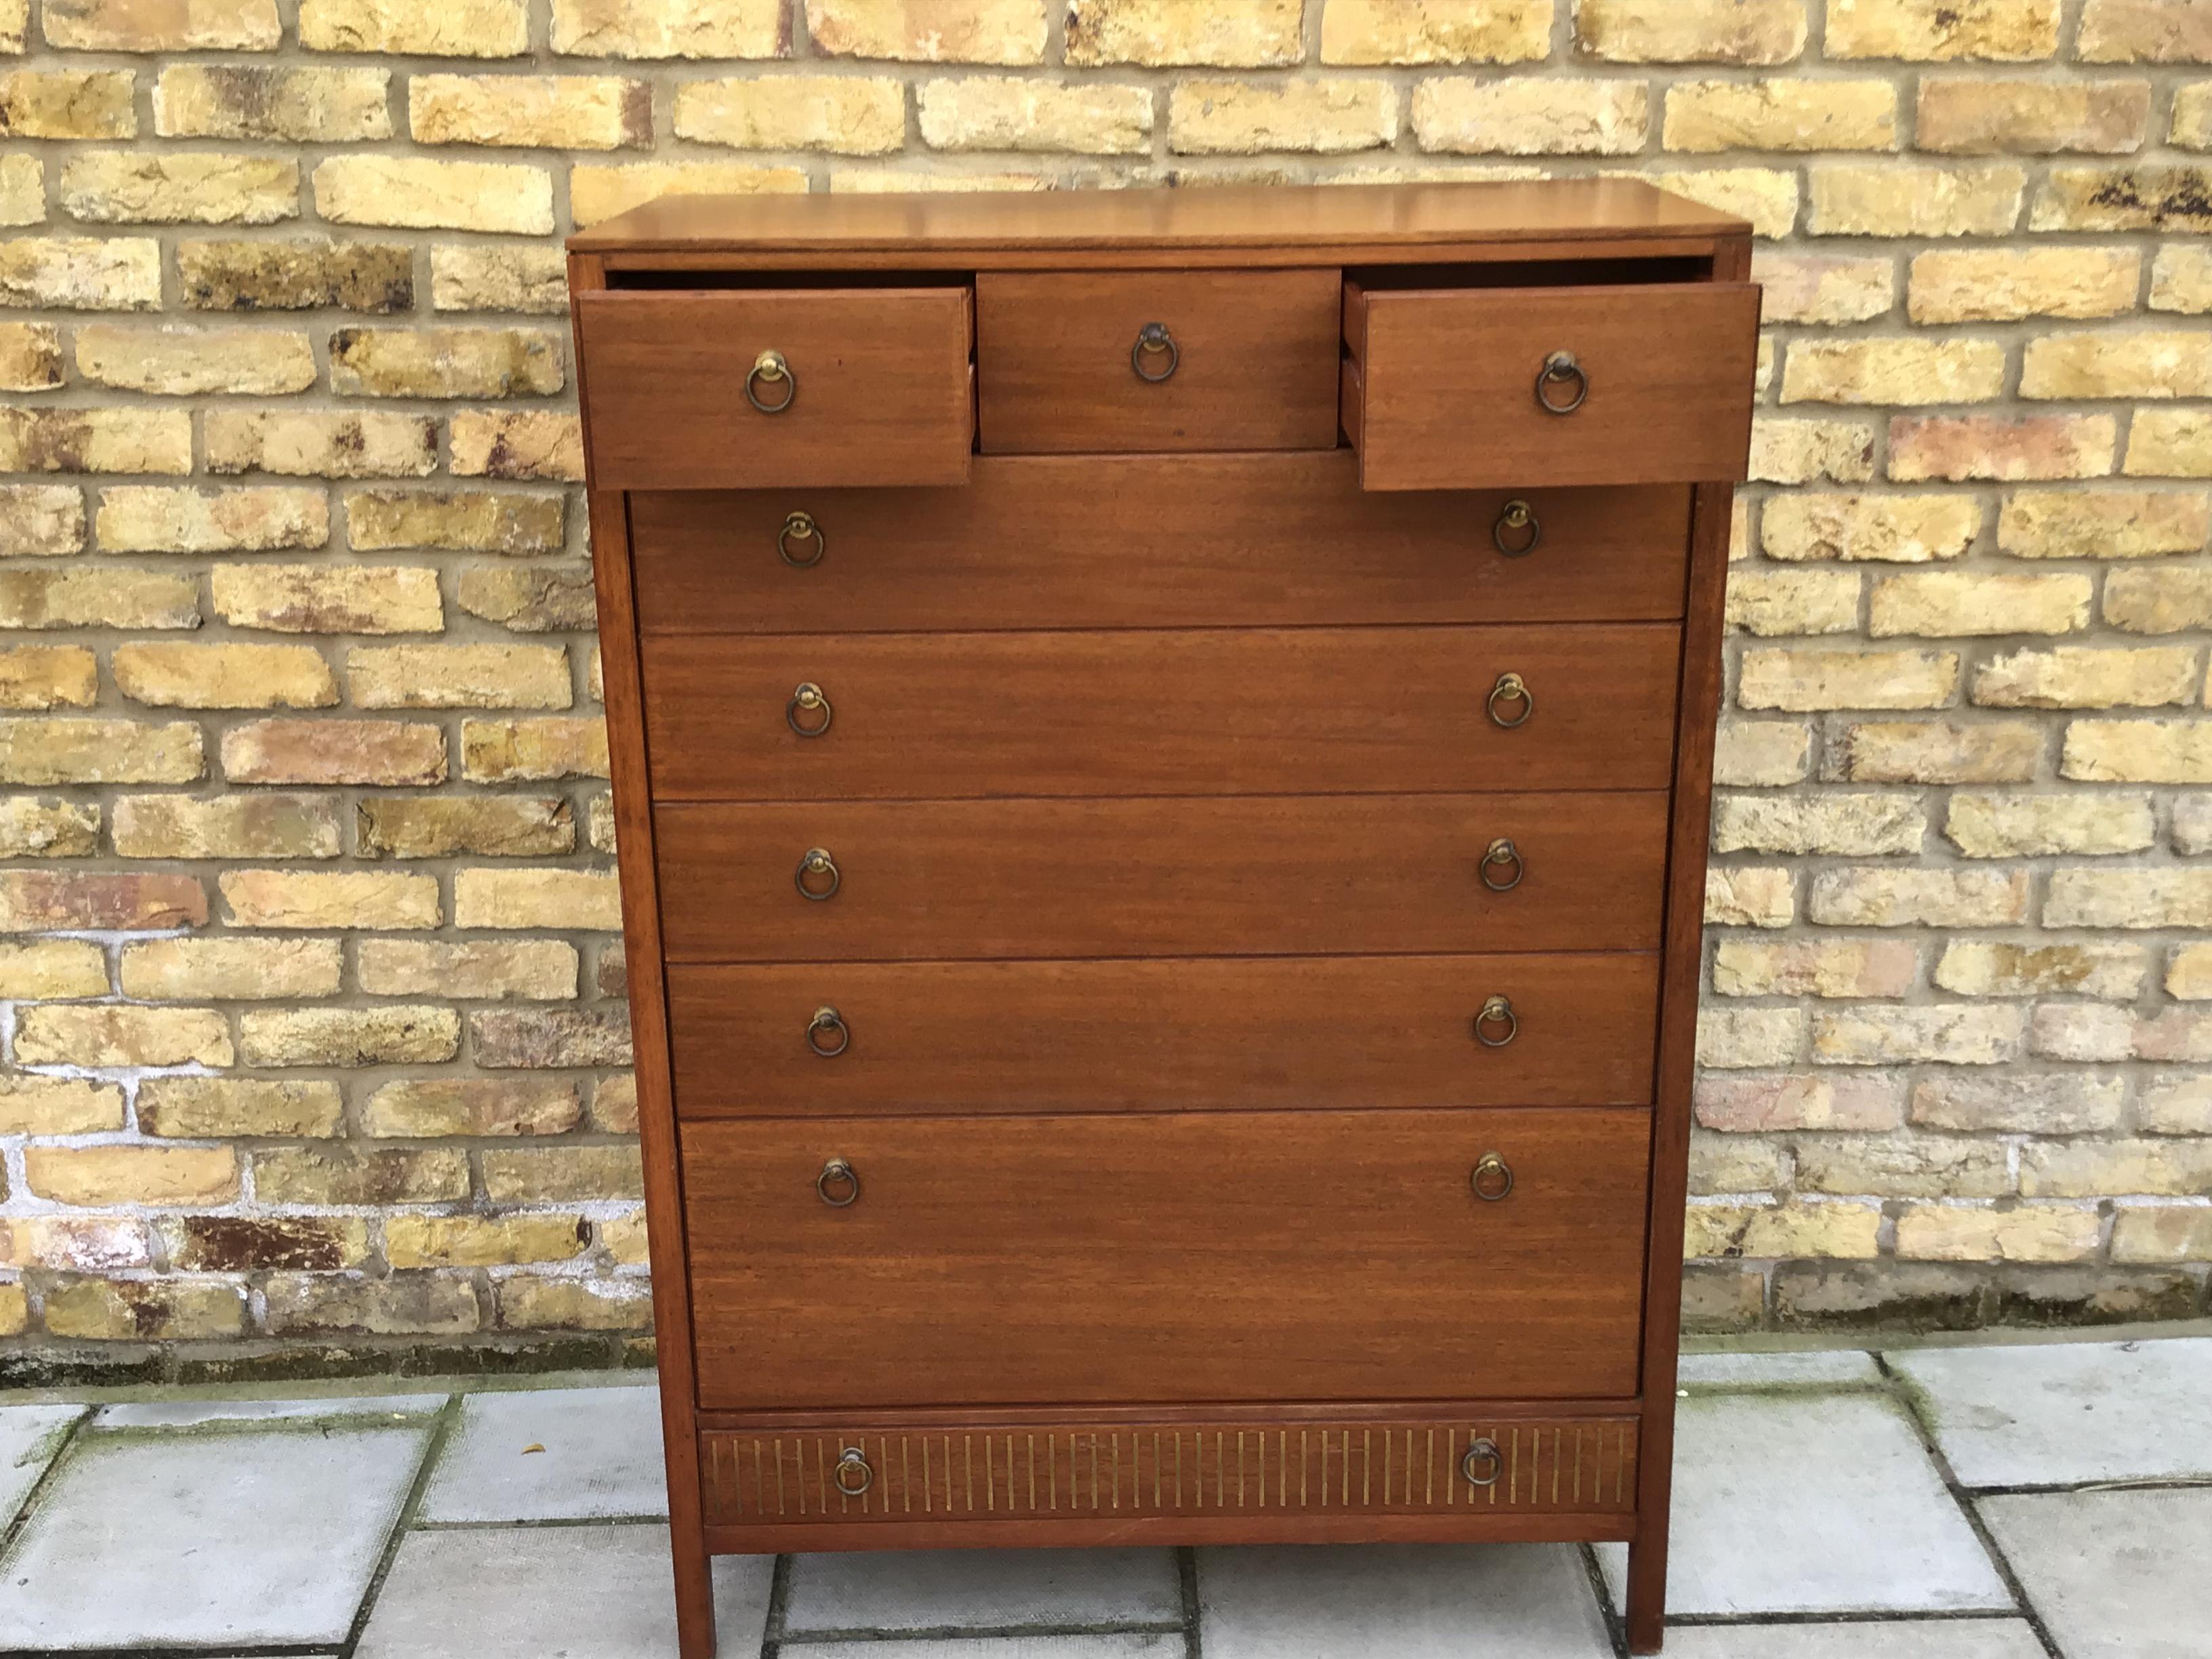 Mult draw chest with graduating draws brass ring handles. Solid teak dimensions
circa 1960s loughborough for heal.